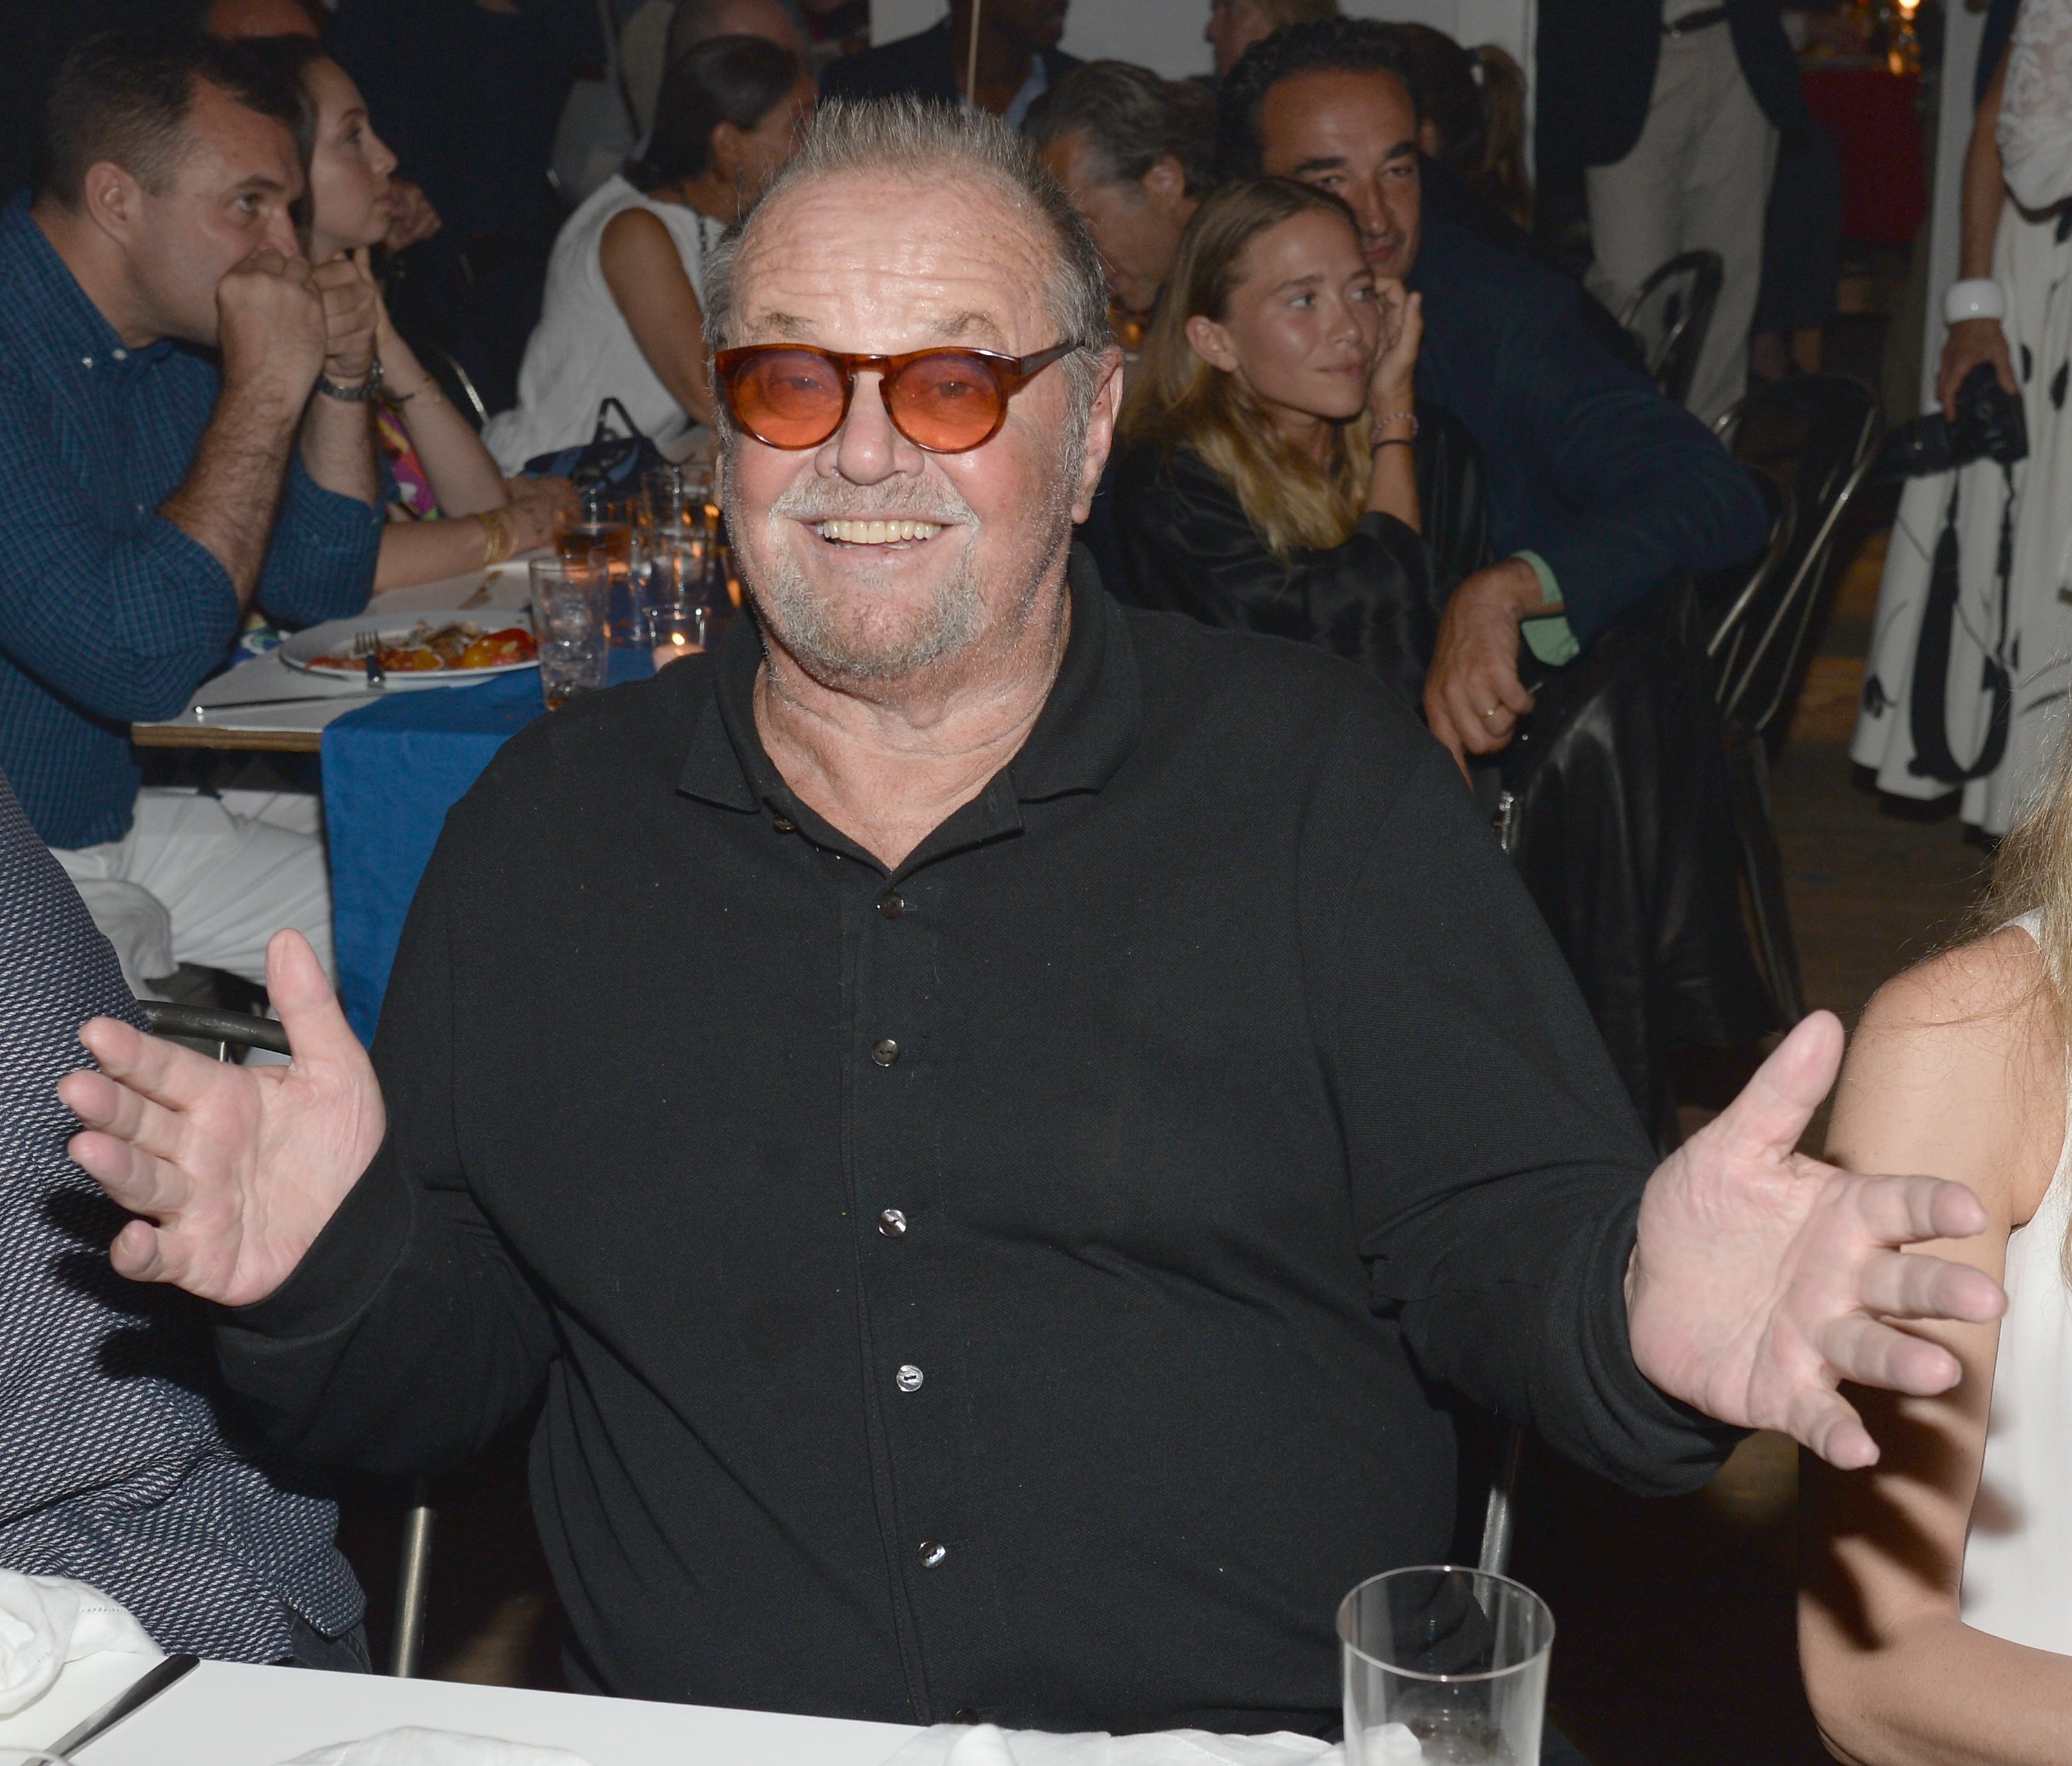 Jack Nicholson attends Apollo in the Hamptons 2015 at The Creeks on August 15, 2015, in East Hampton, New York. | Source: Getty Images.